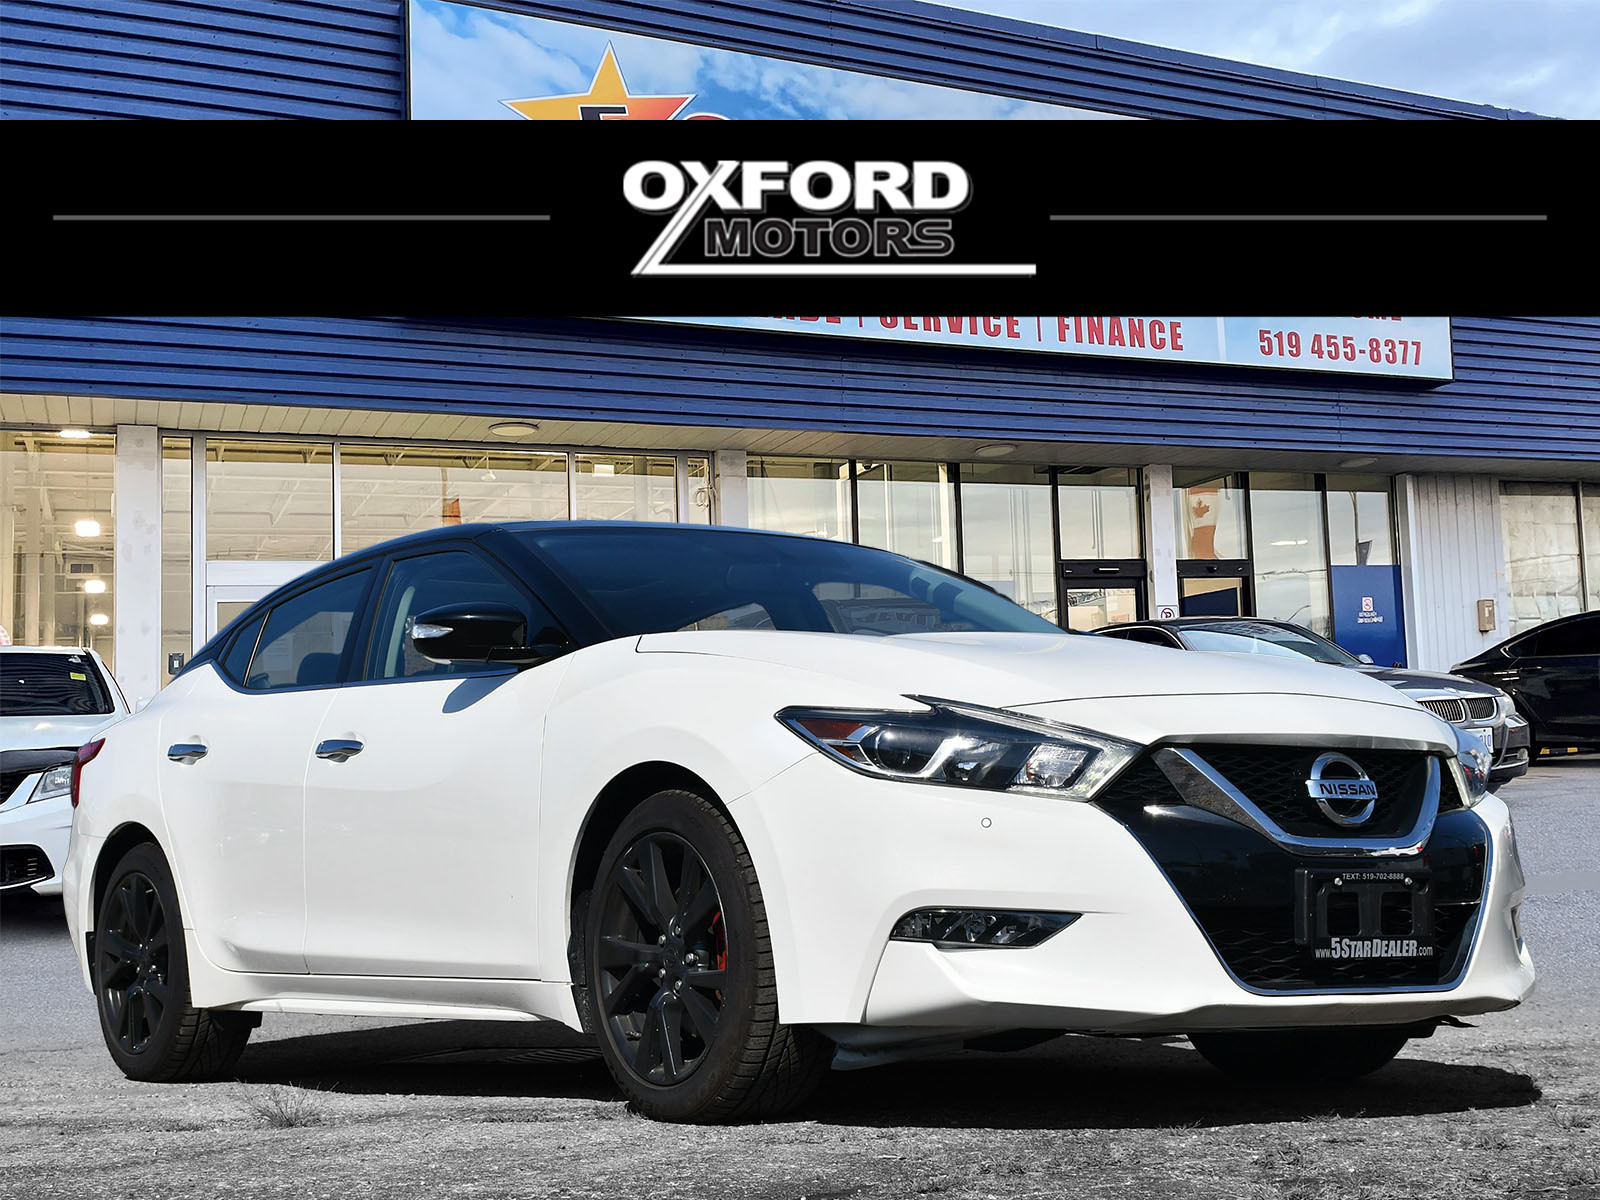 2018 Nissan Maxima NAV LEATHER PANO ROOF MINT! WE FINANCE ALL CREDIT!